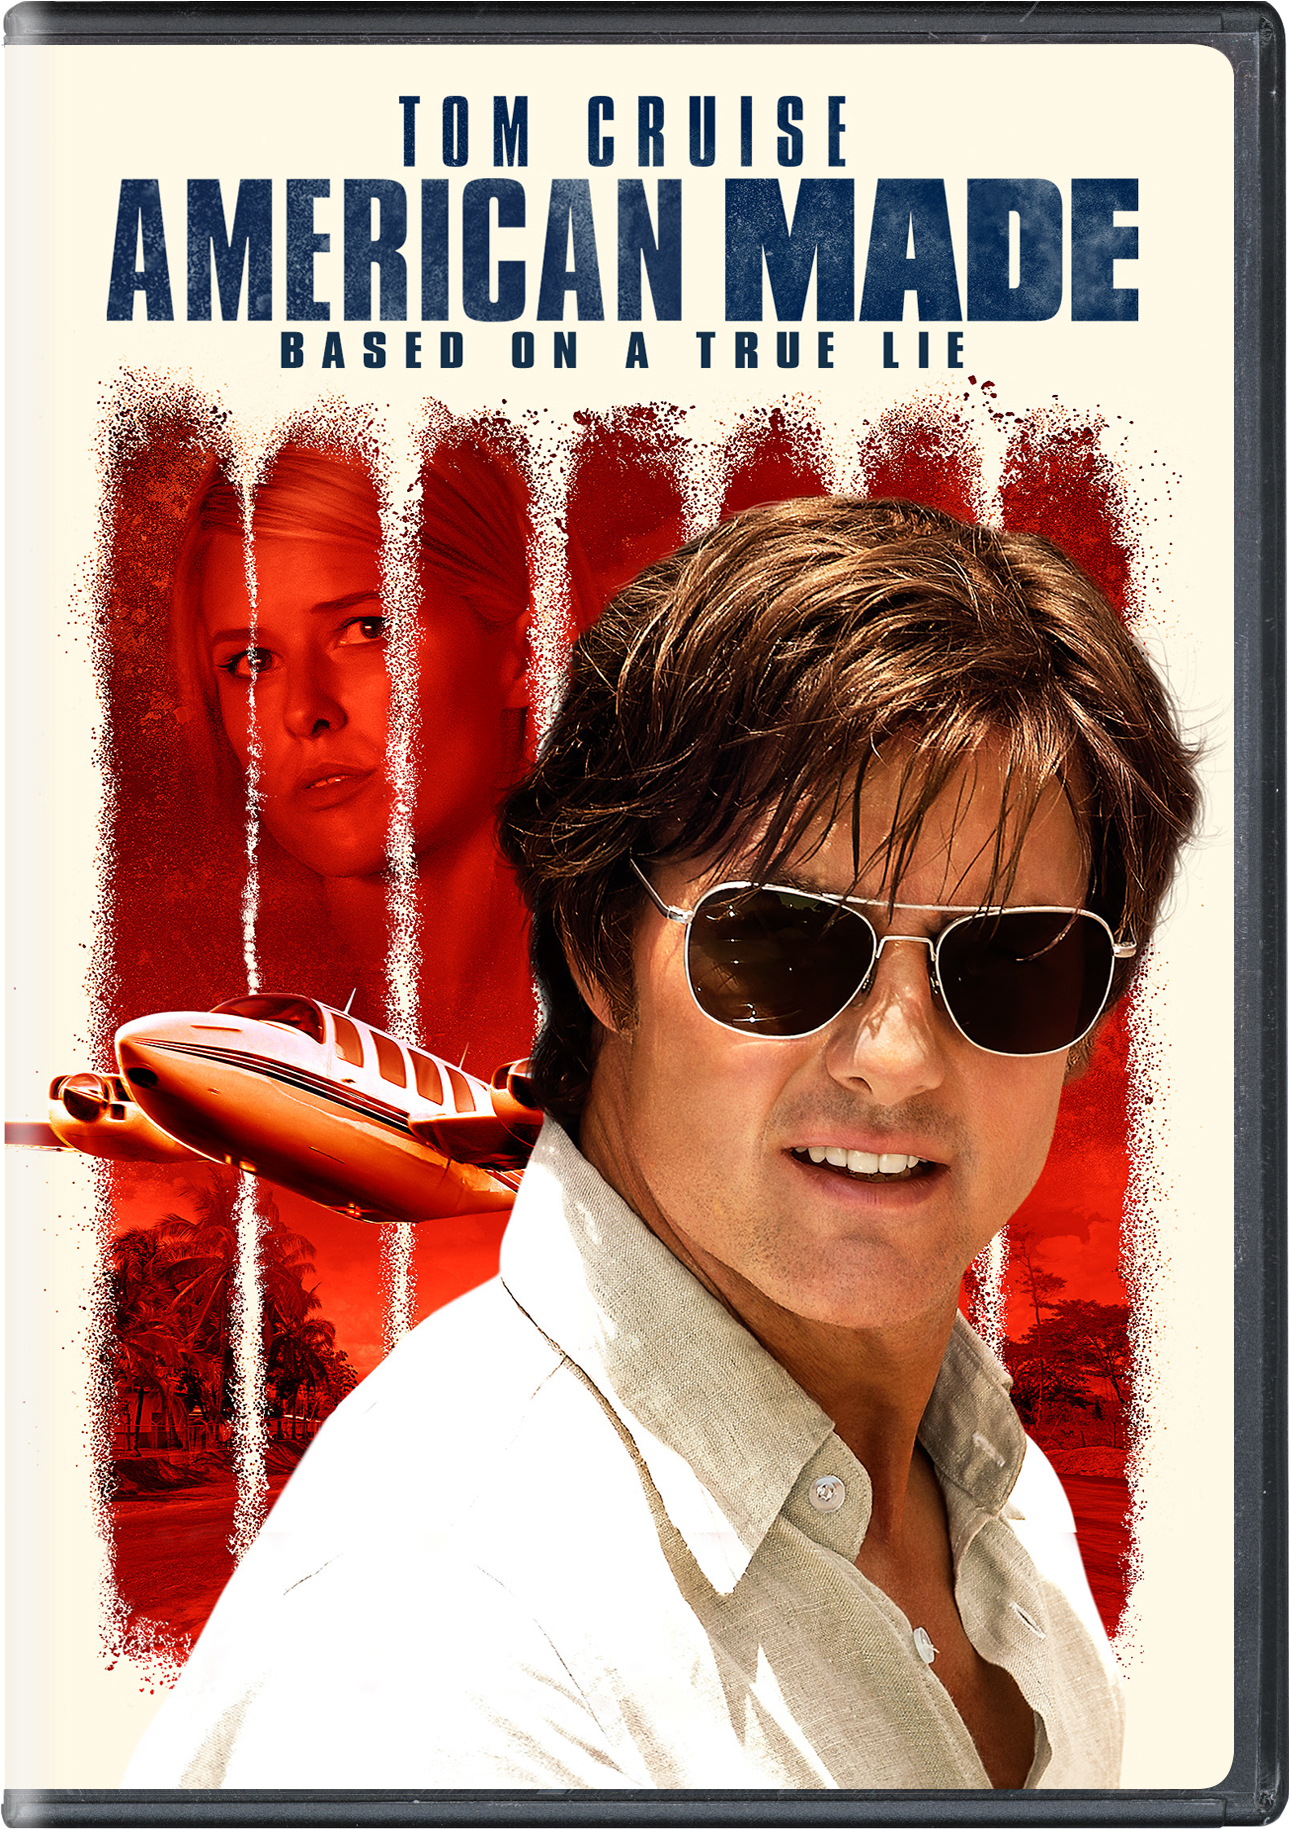 American Made - DVD [ 2017 ]  - Thriller Movies On DVD - Movies On GRUV